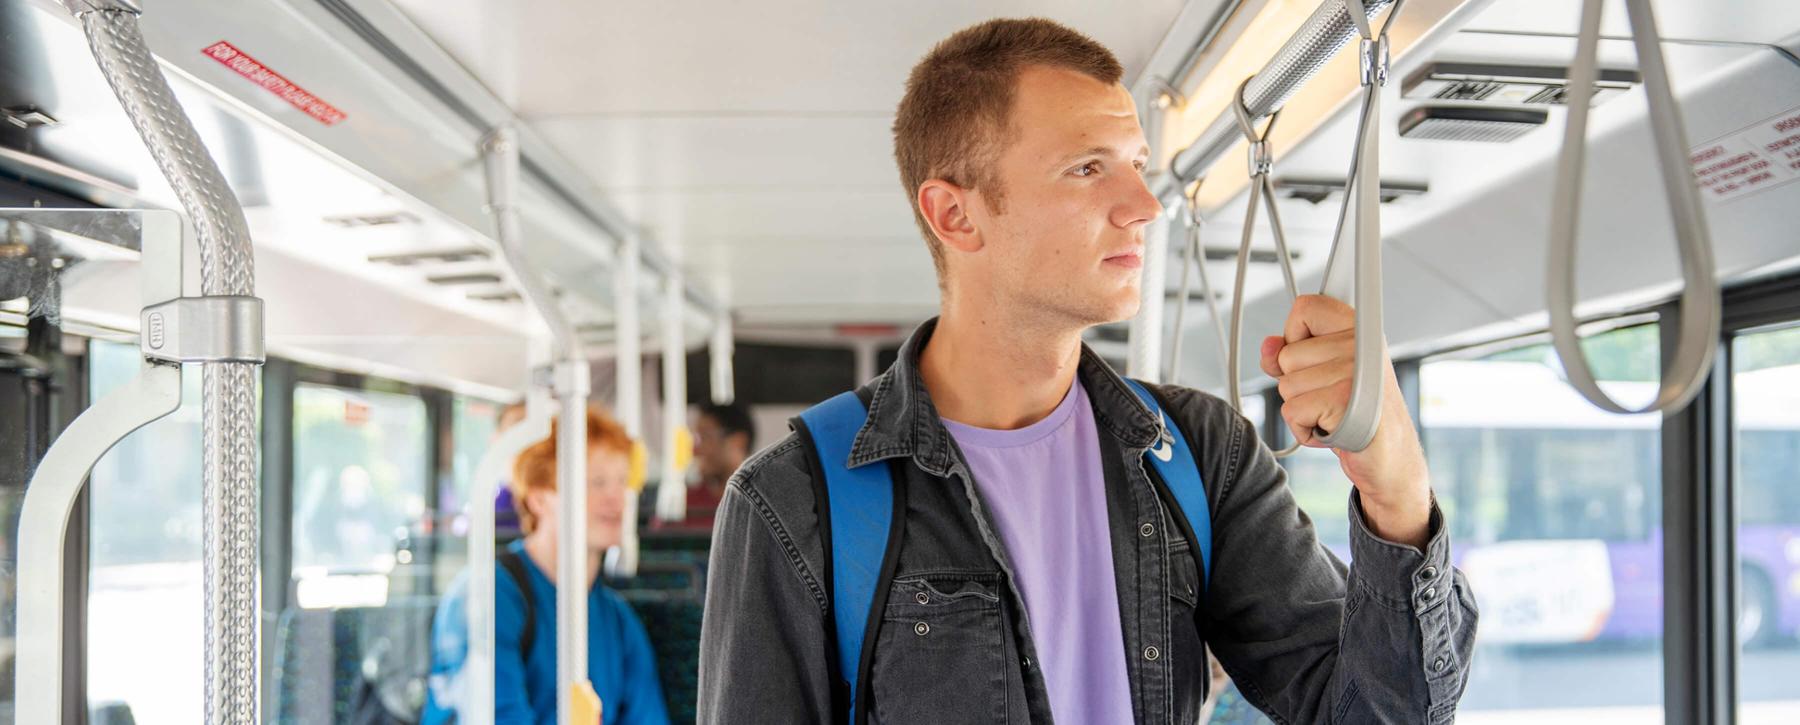 A person holds a hand strap while riding a bus.